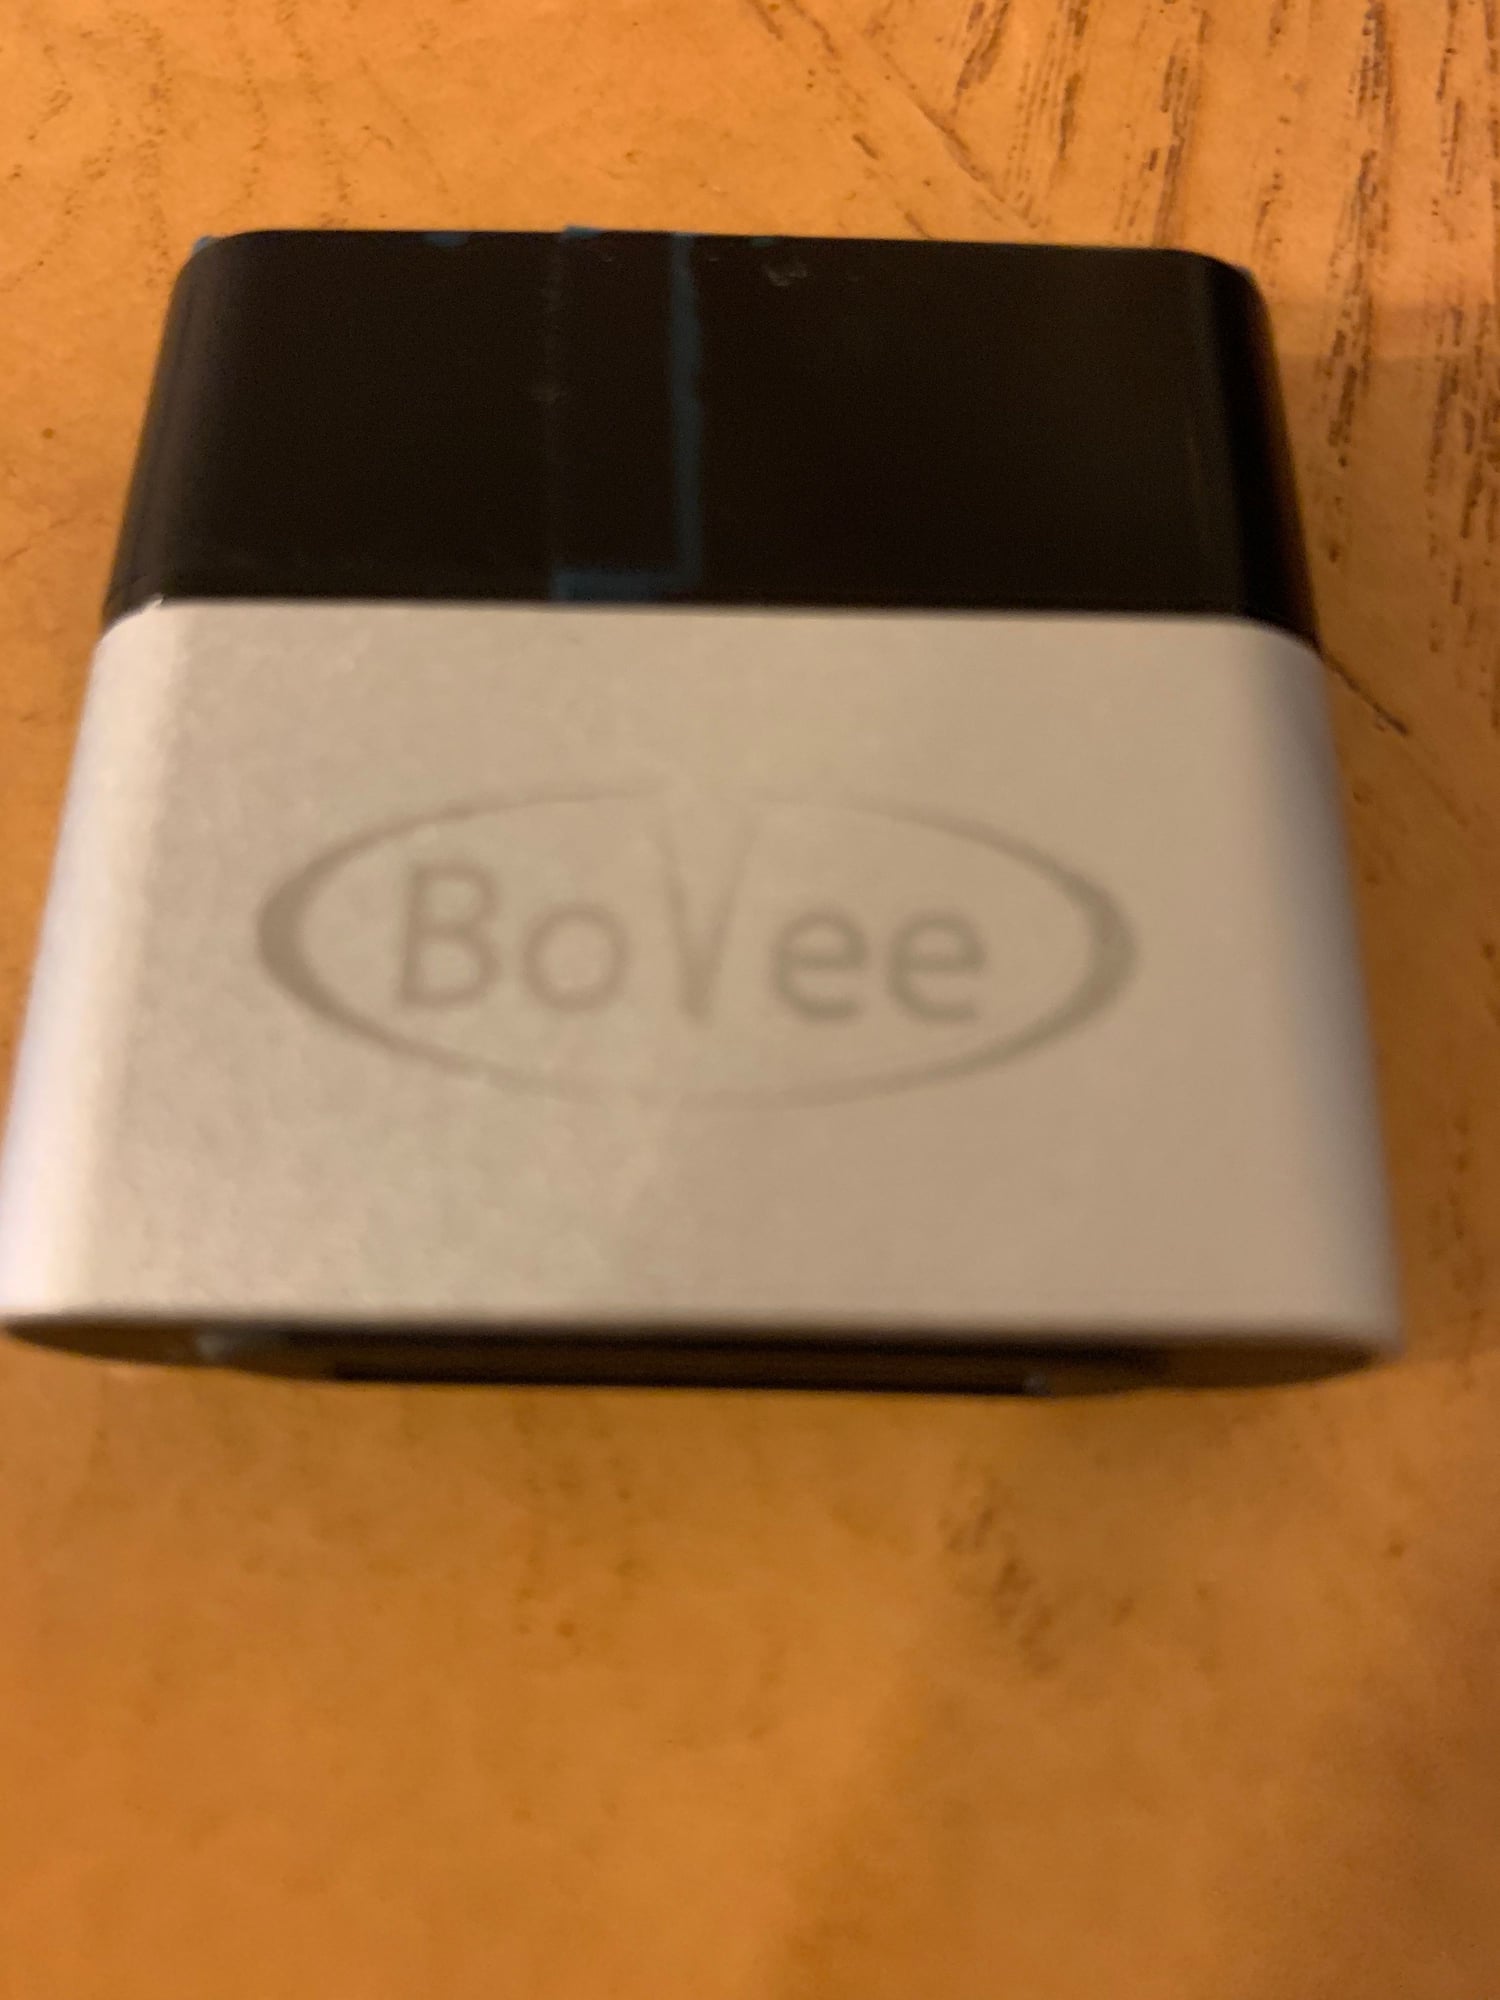 Audio Video/Electronics - BoVee Bluetooth Adapter - Used - 2008 to 2013 Mercedes-Benz C300 - Miami, FL 33184, United States